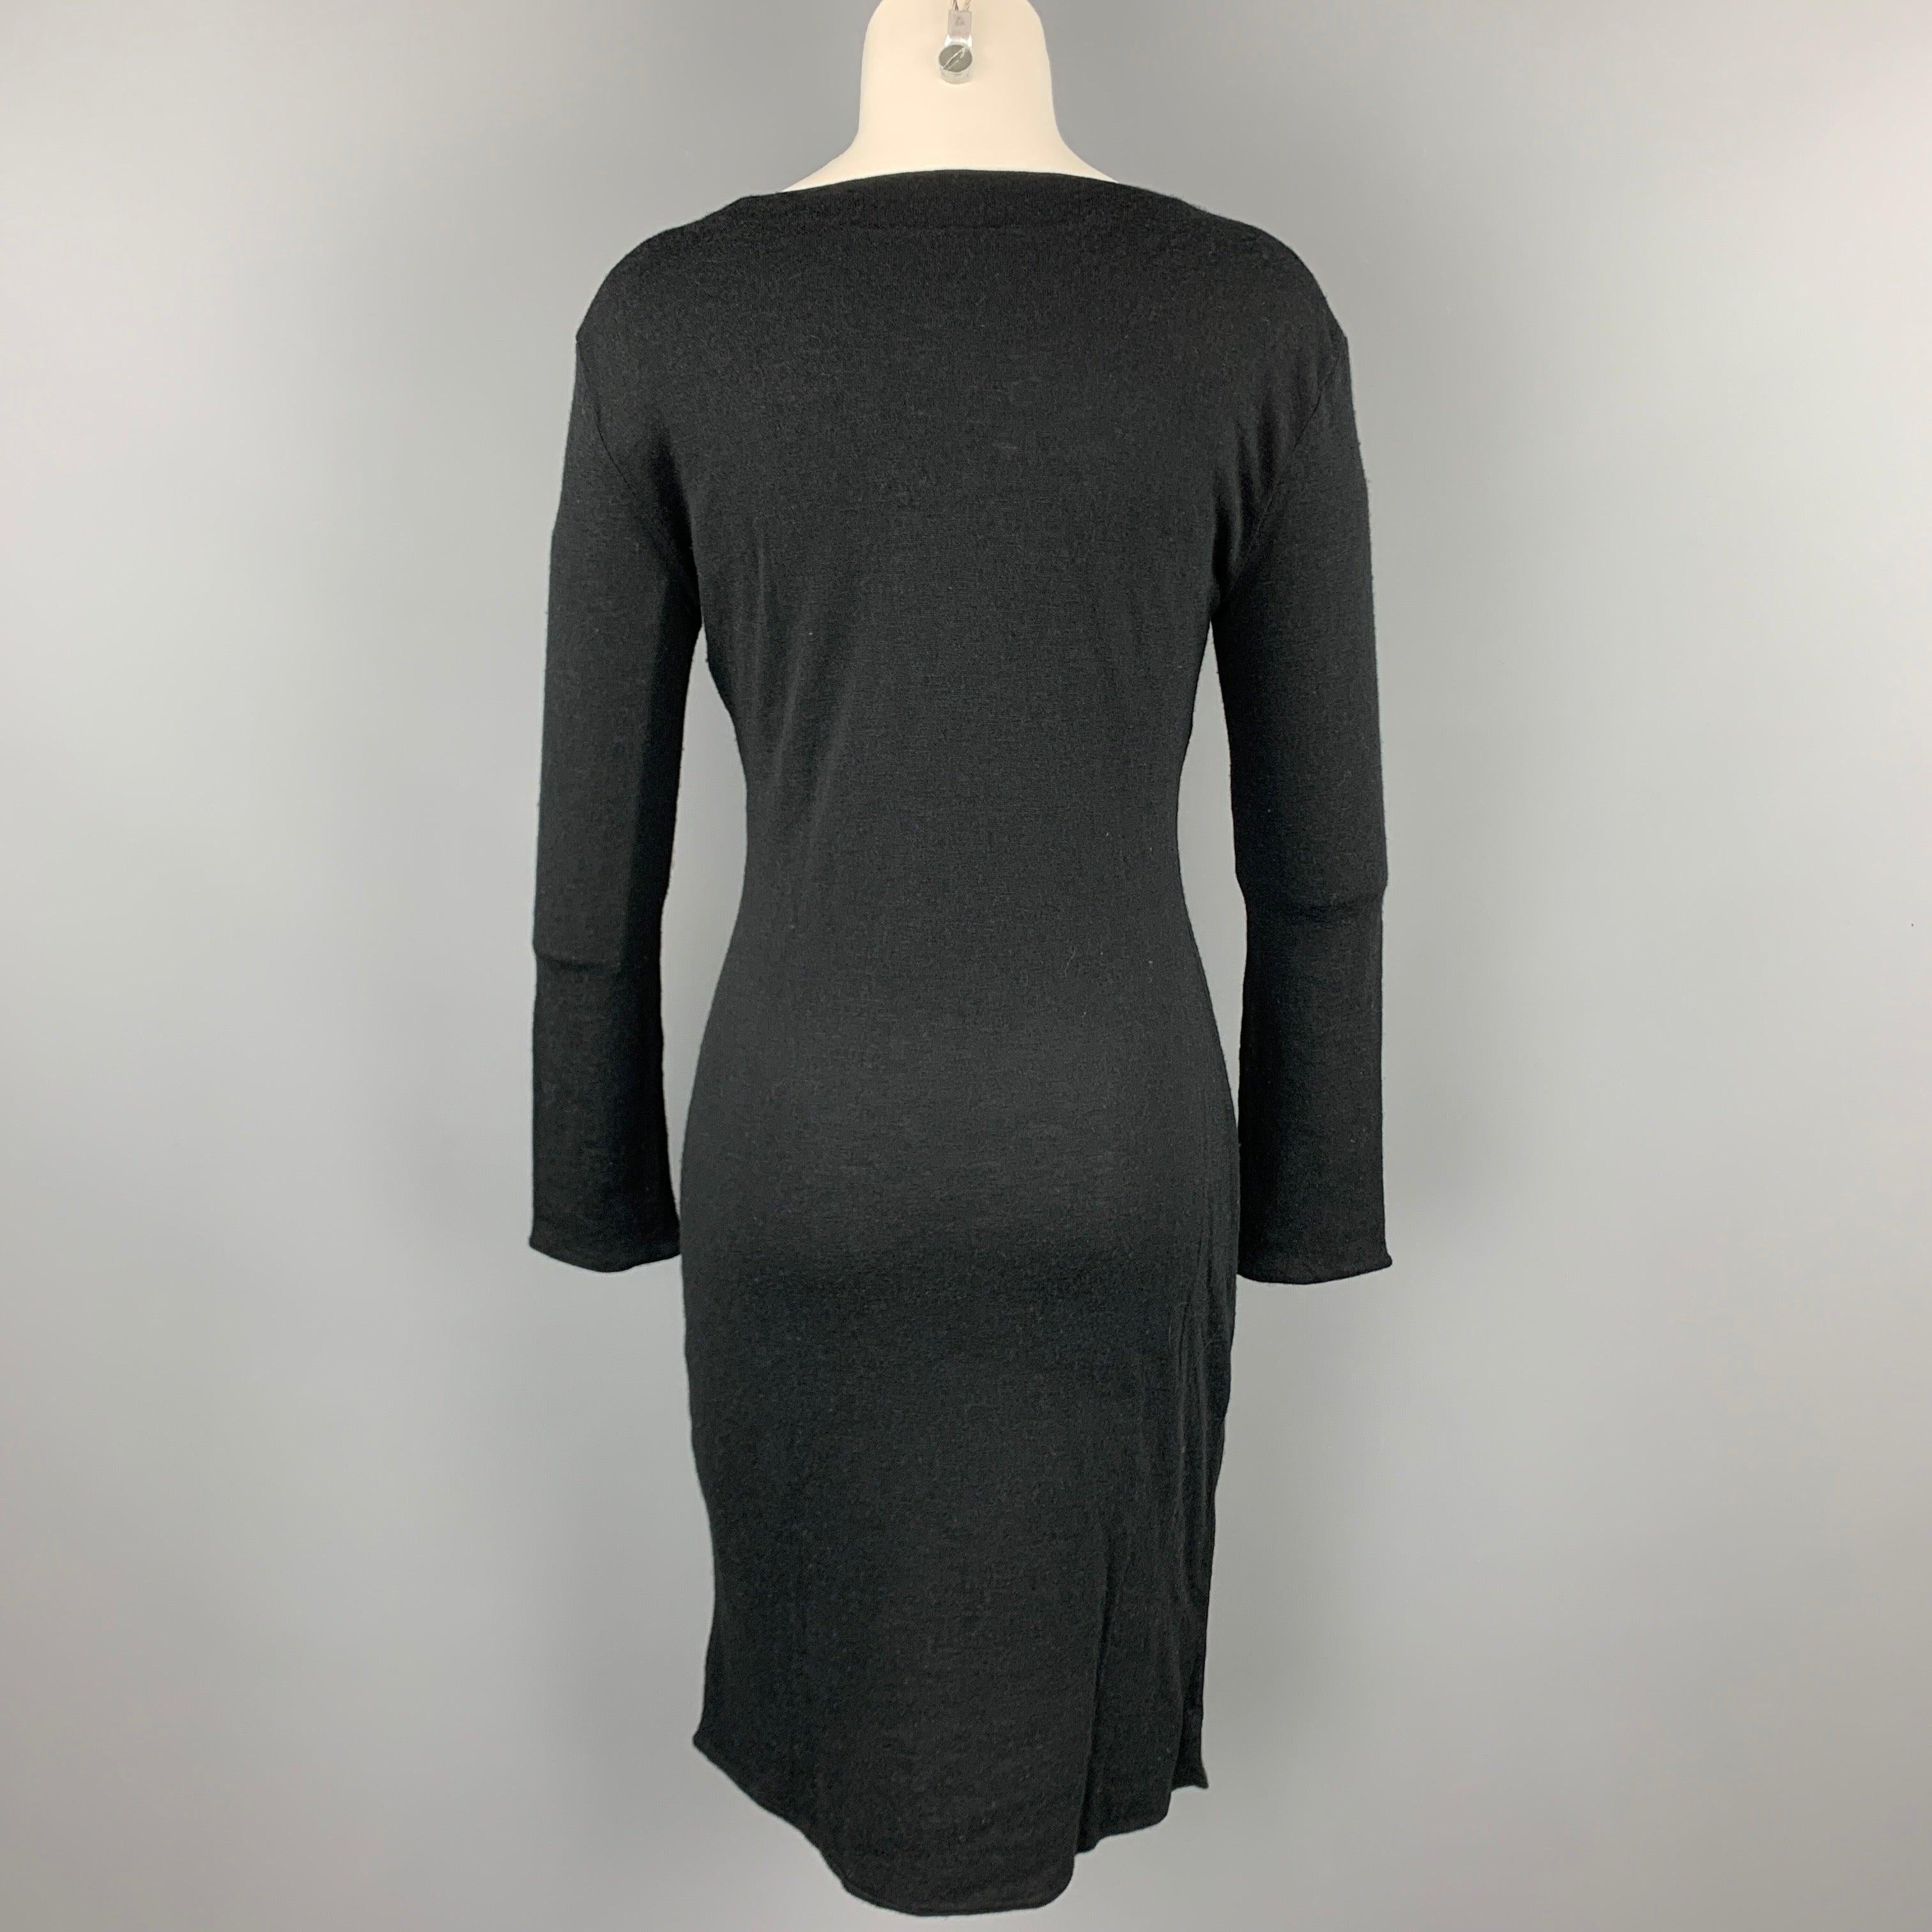 MAISON MARTIN MARGIELA Size S Black Viscose / Wool Sweater Dress In Good Condition For Sale In San Francisco, CA